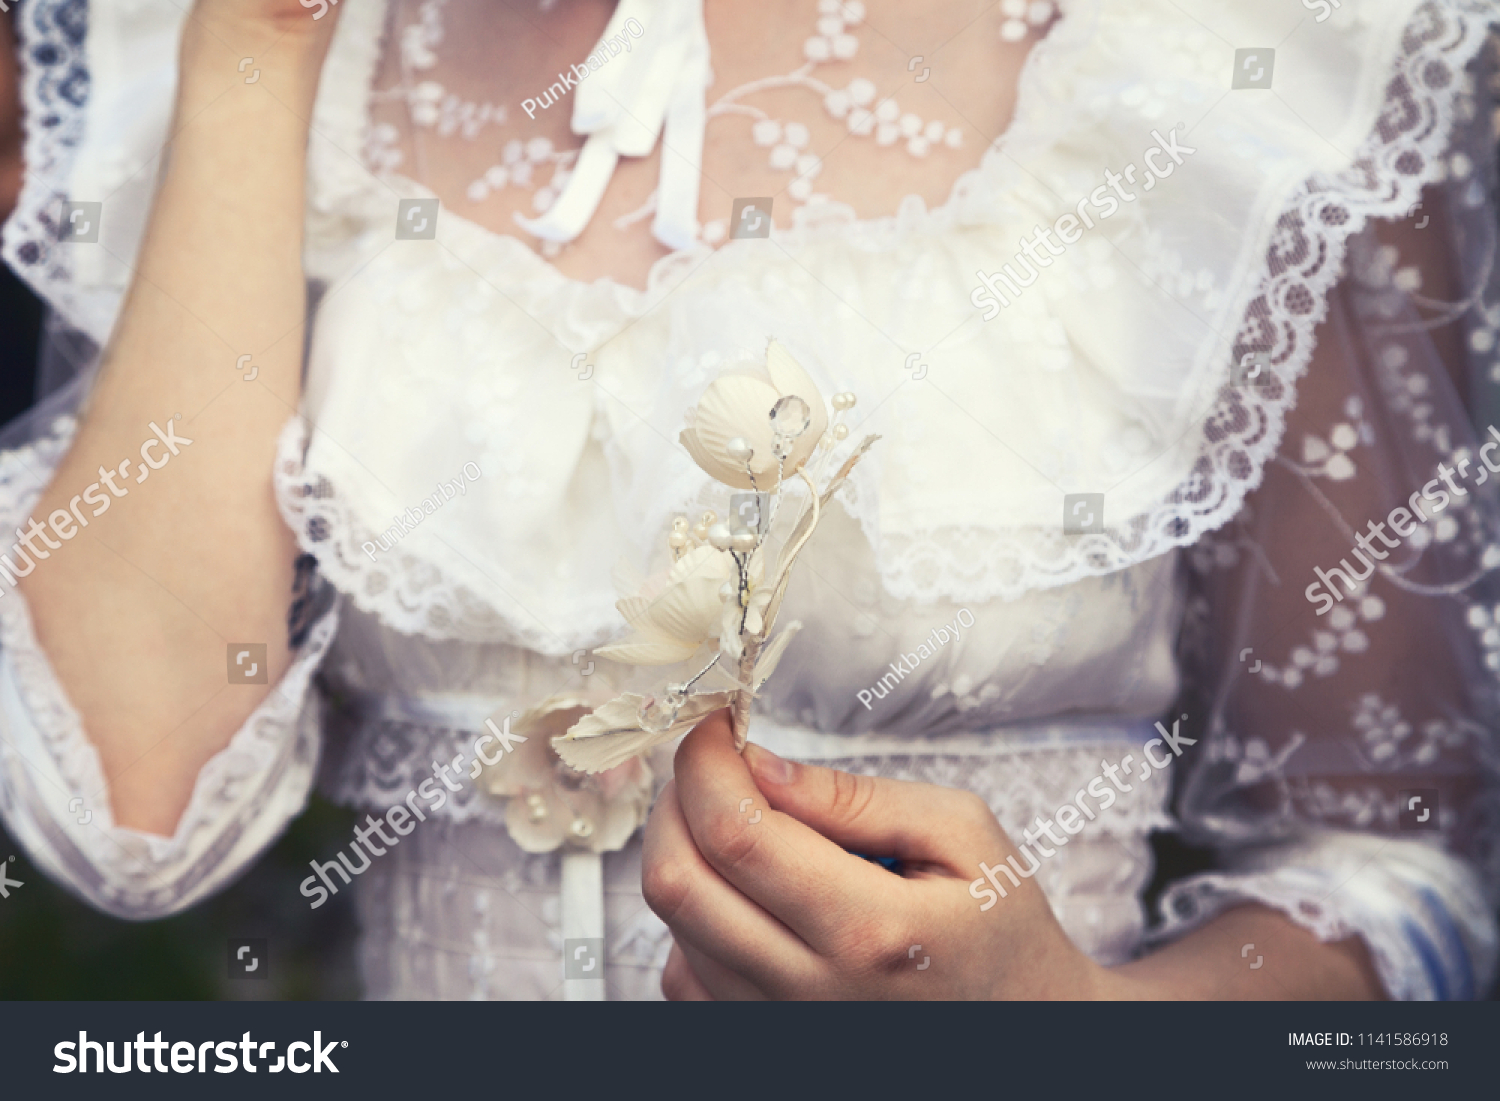 Young virgin girl in a white lace wedding dress holding a flower. Tender delicate woman at a wedding  #1141586918